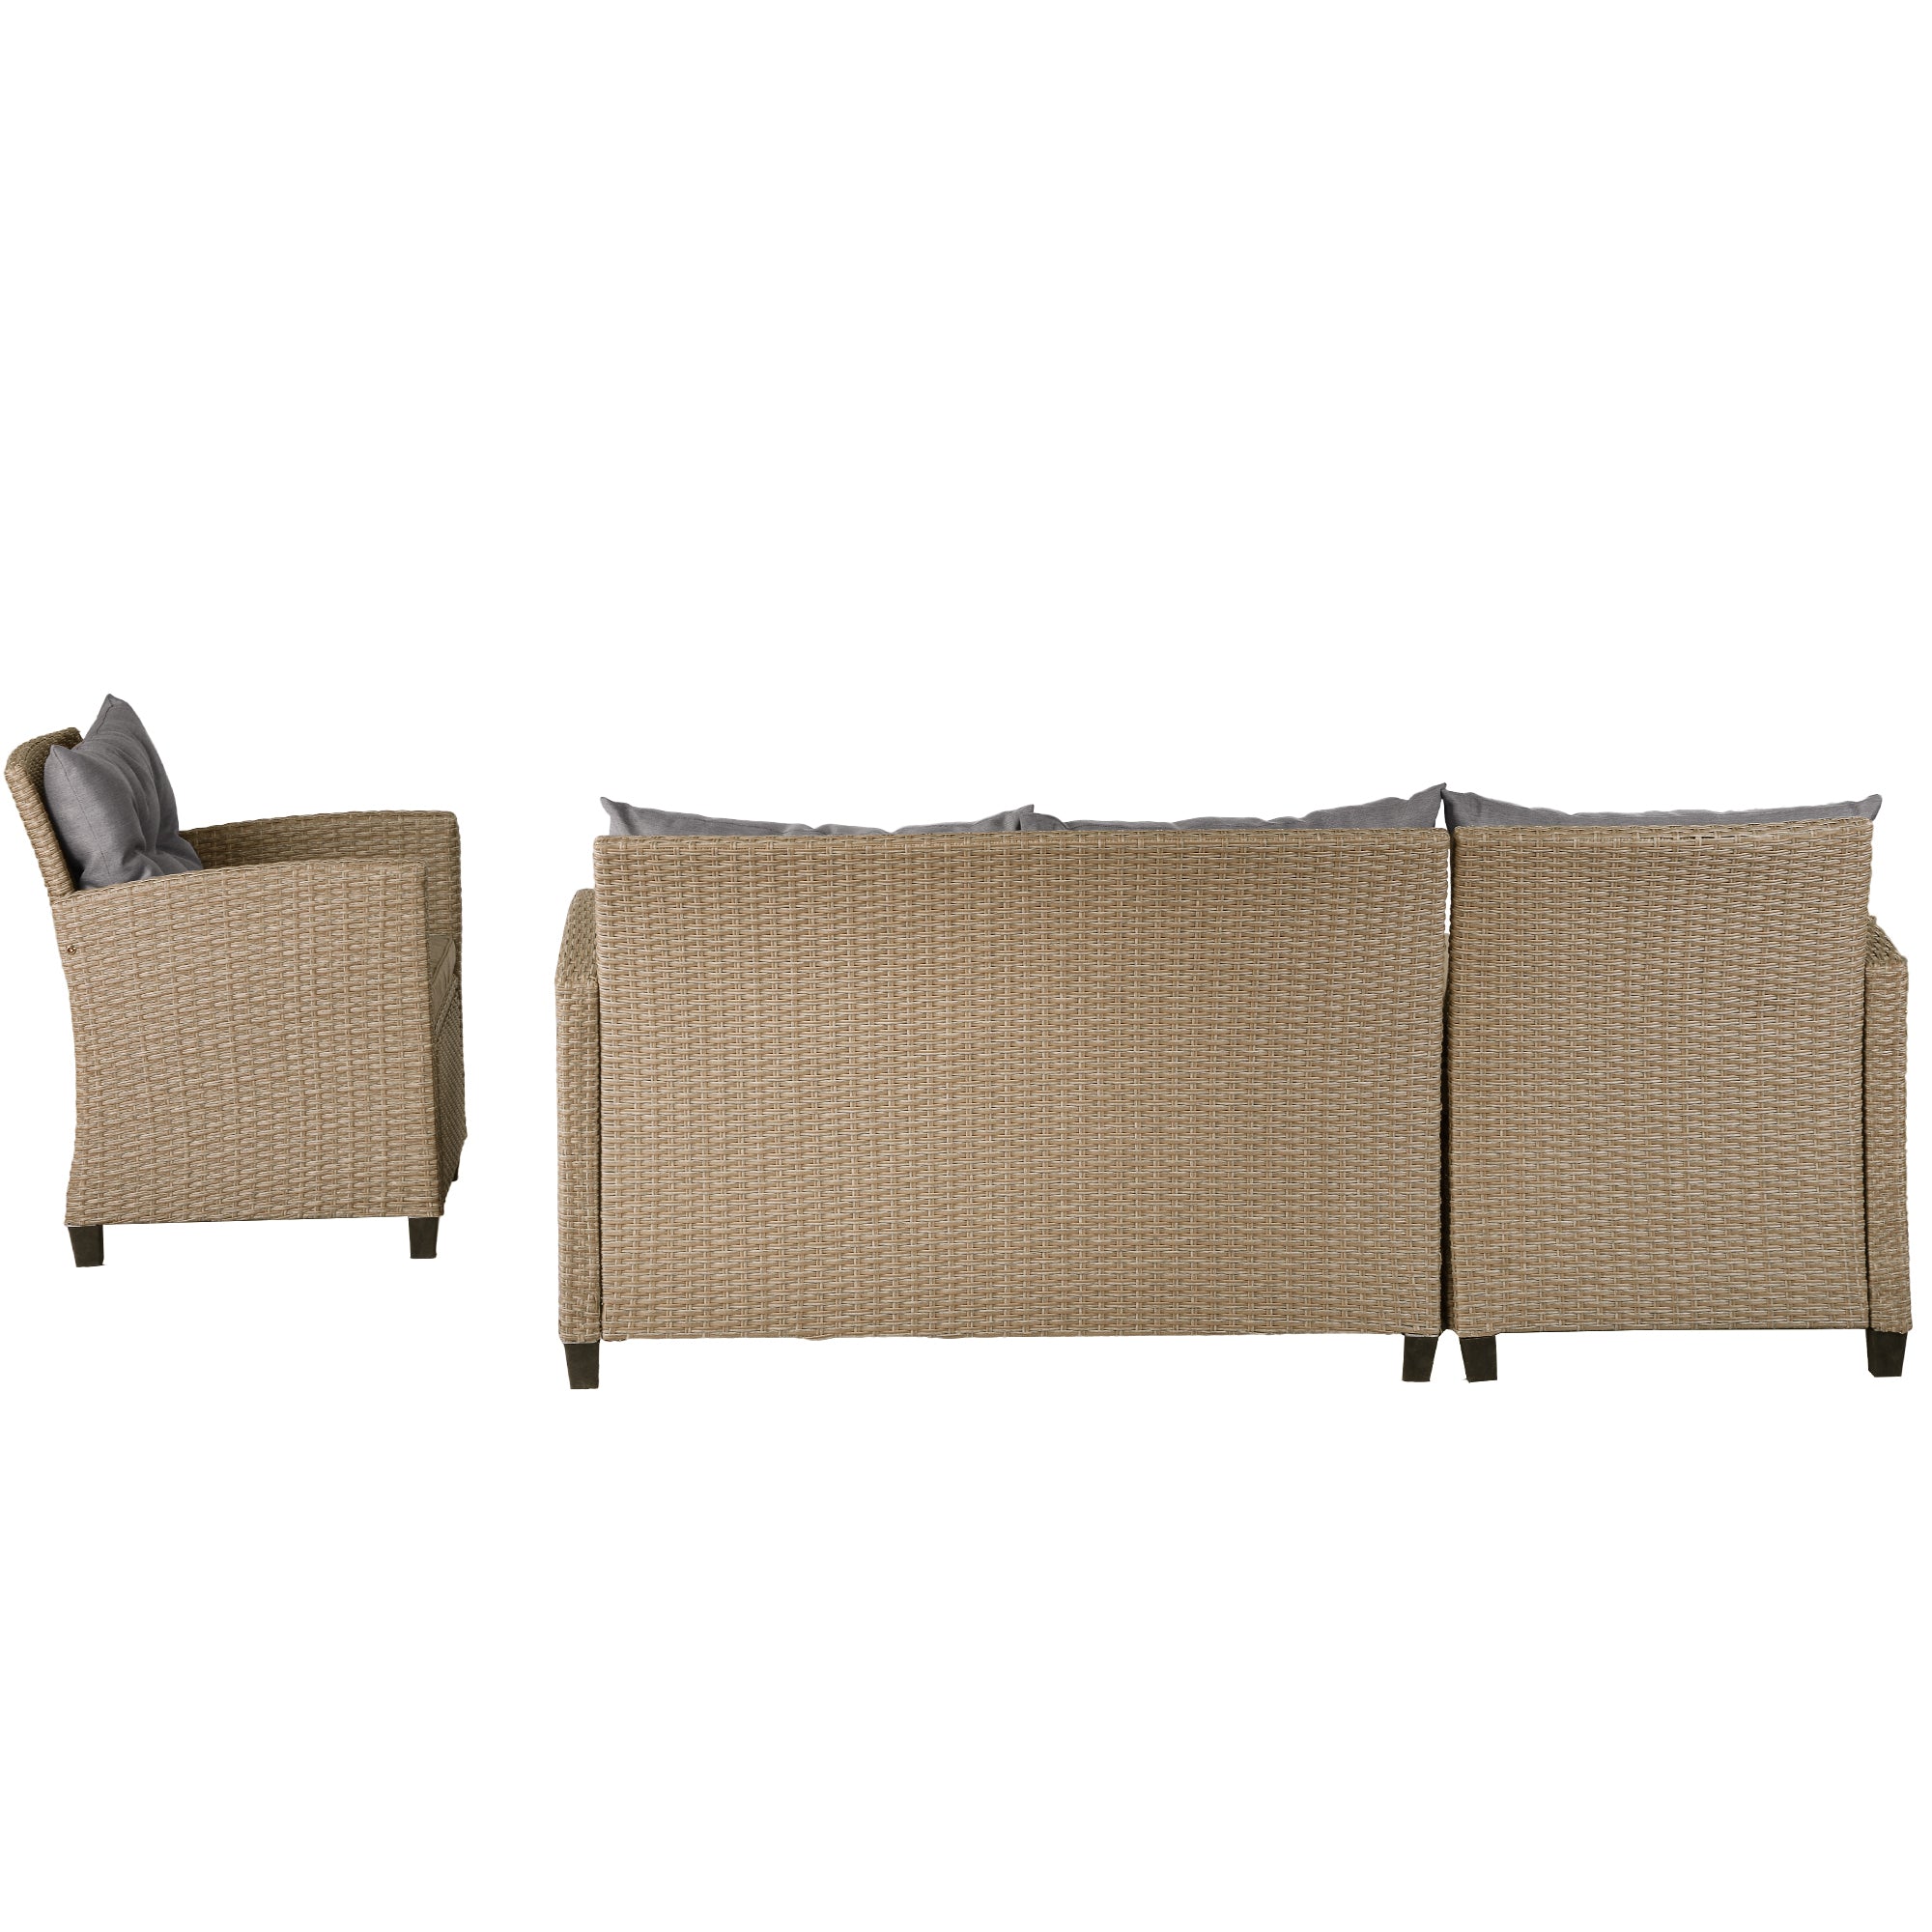 4 Piece Outdoor Wicker Sectional Sofa with Gray Cushion, Brown Rattan